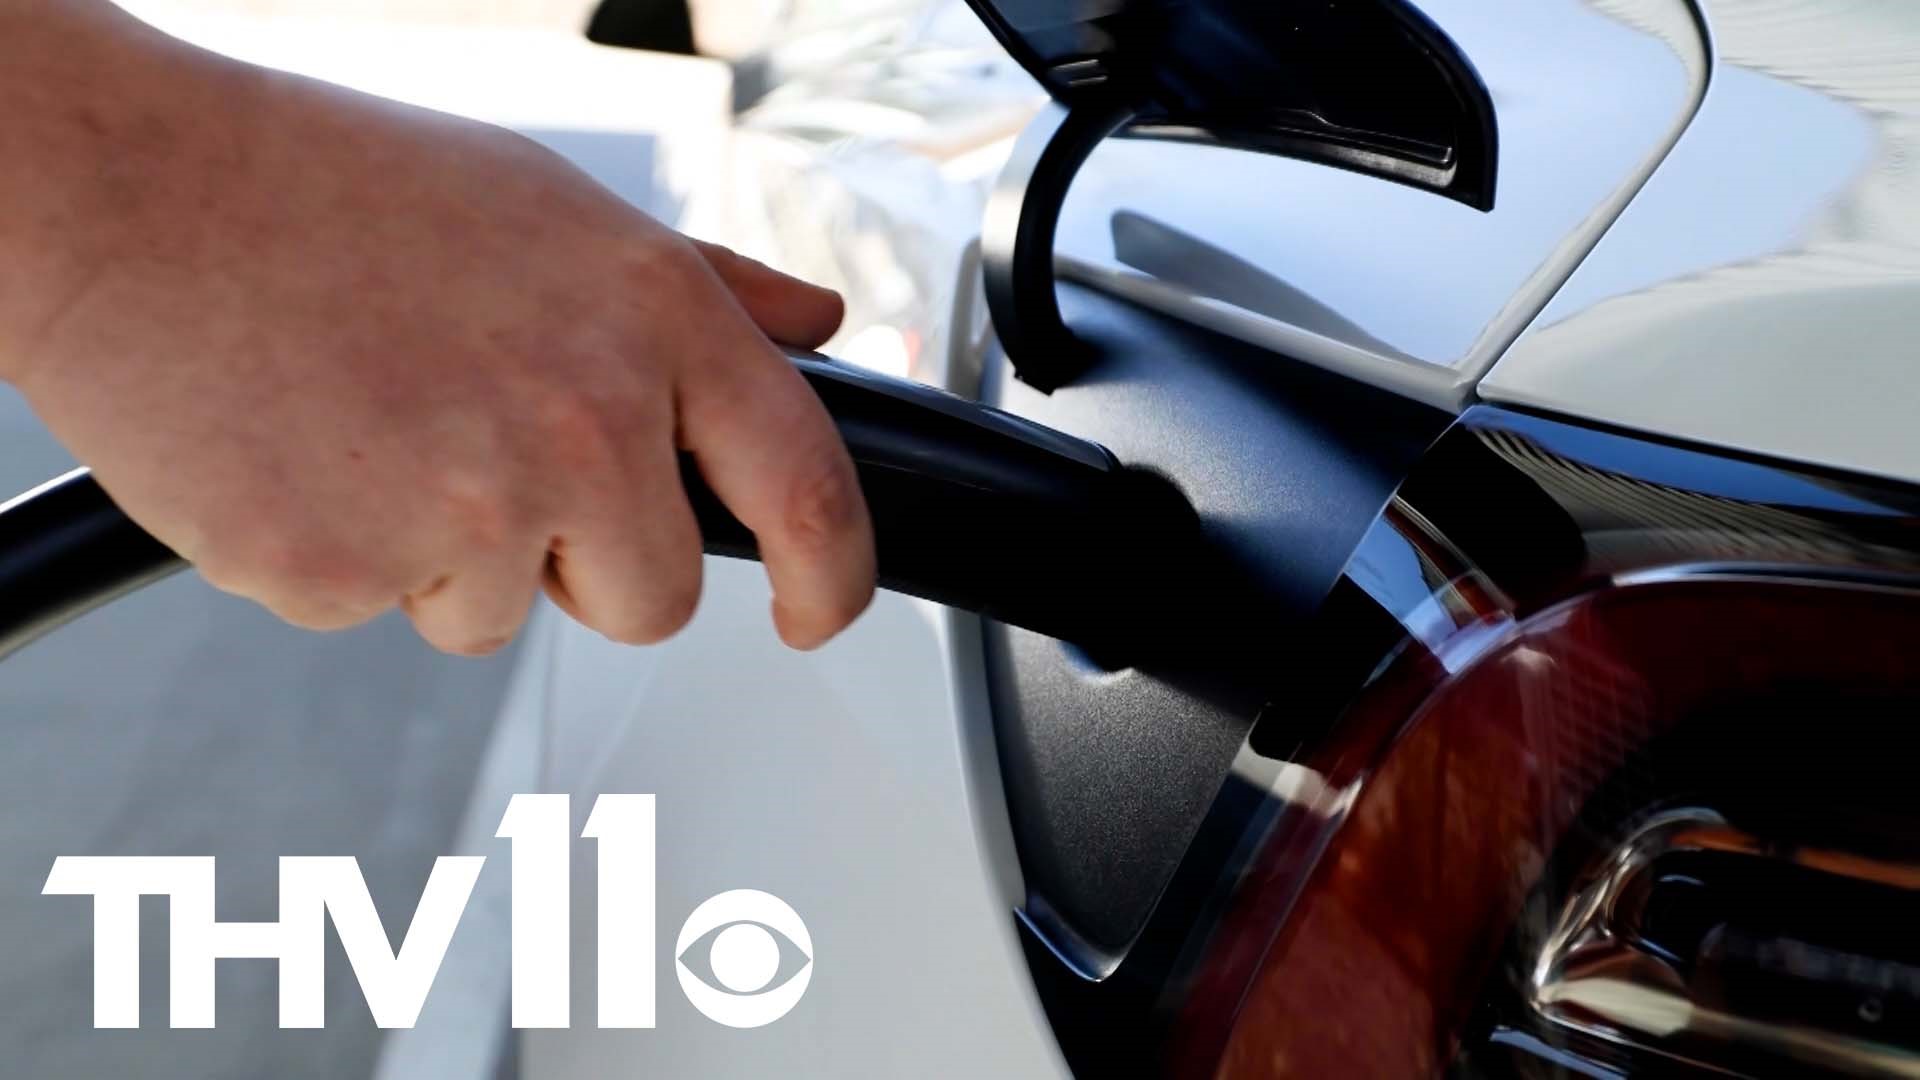 More electric and hybrid cars in Arkansas, officials say